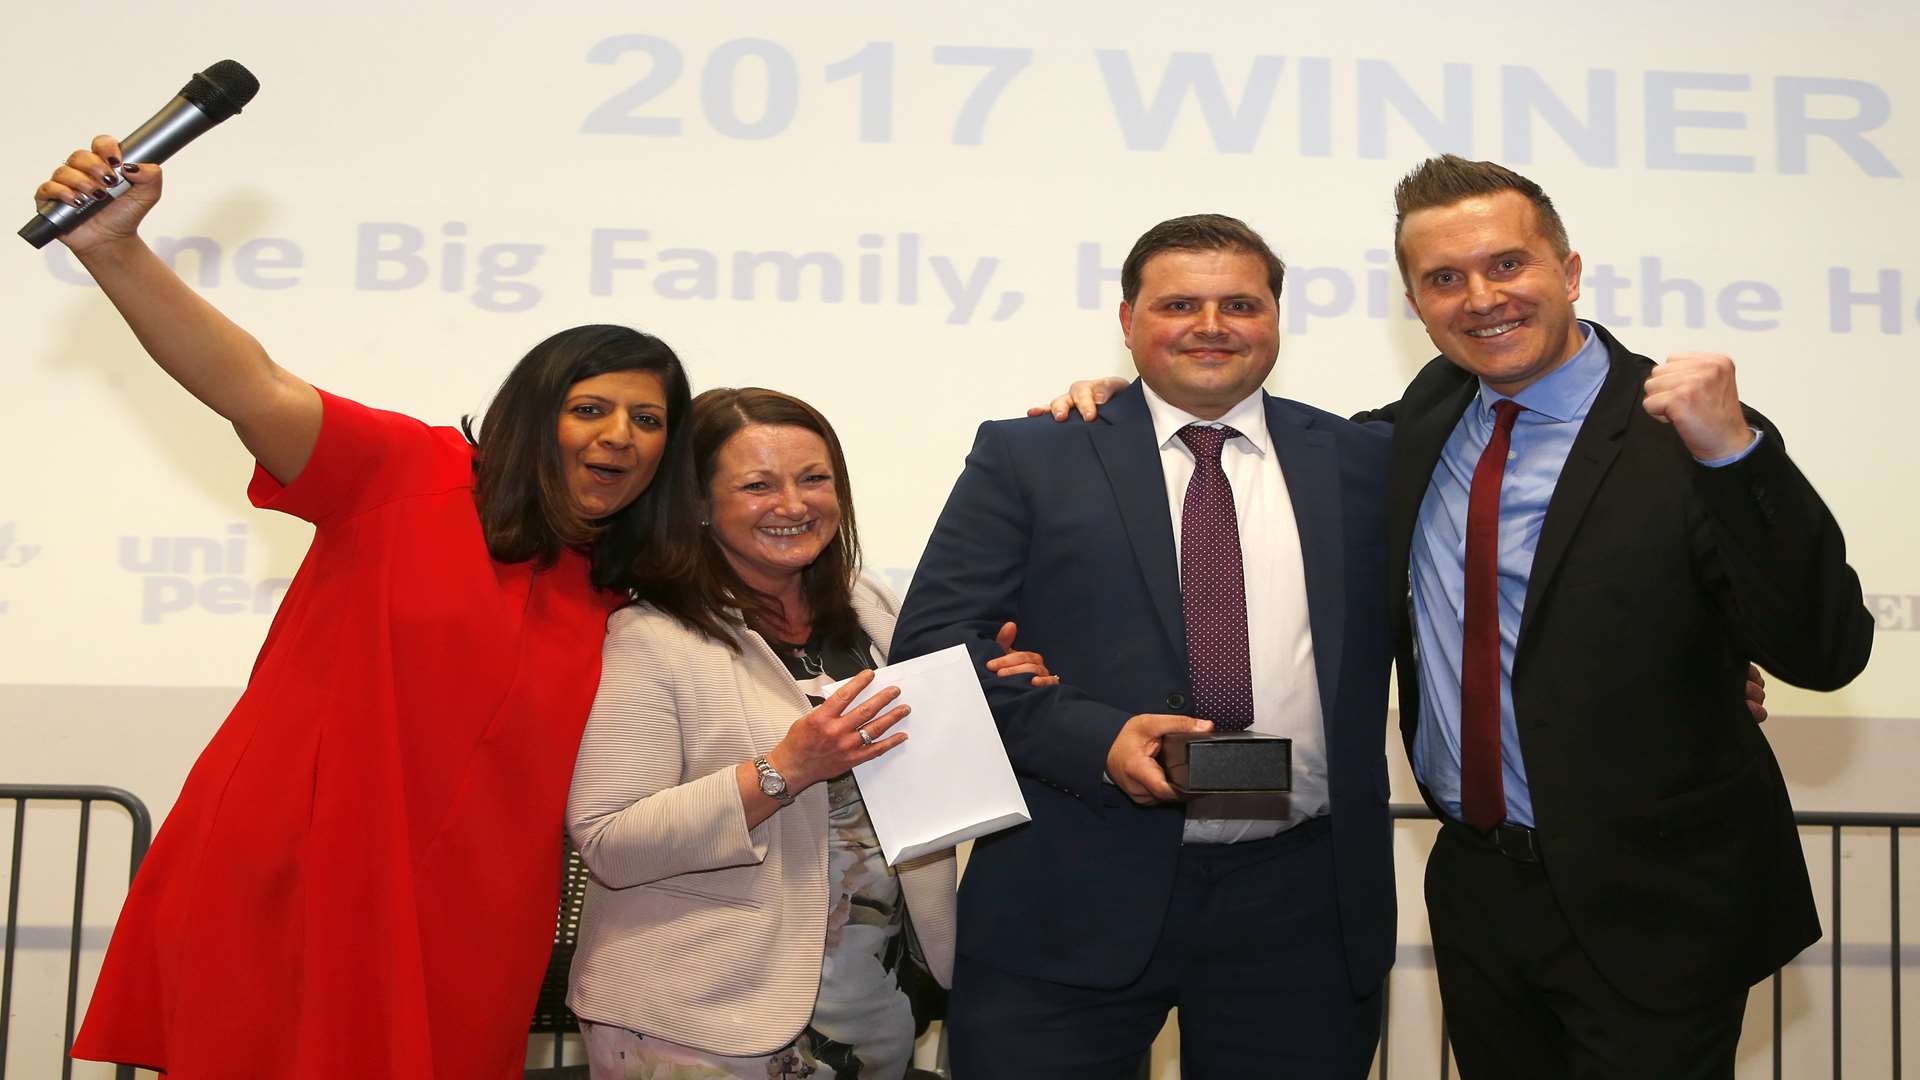 Pride in Medway Winners 2017 Liz and Darren Shaw from One Big Family Helping the Homeless